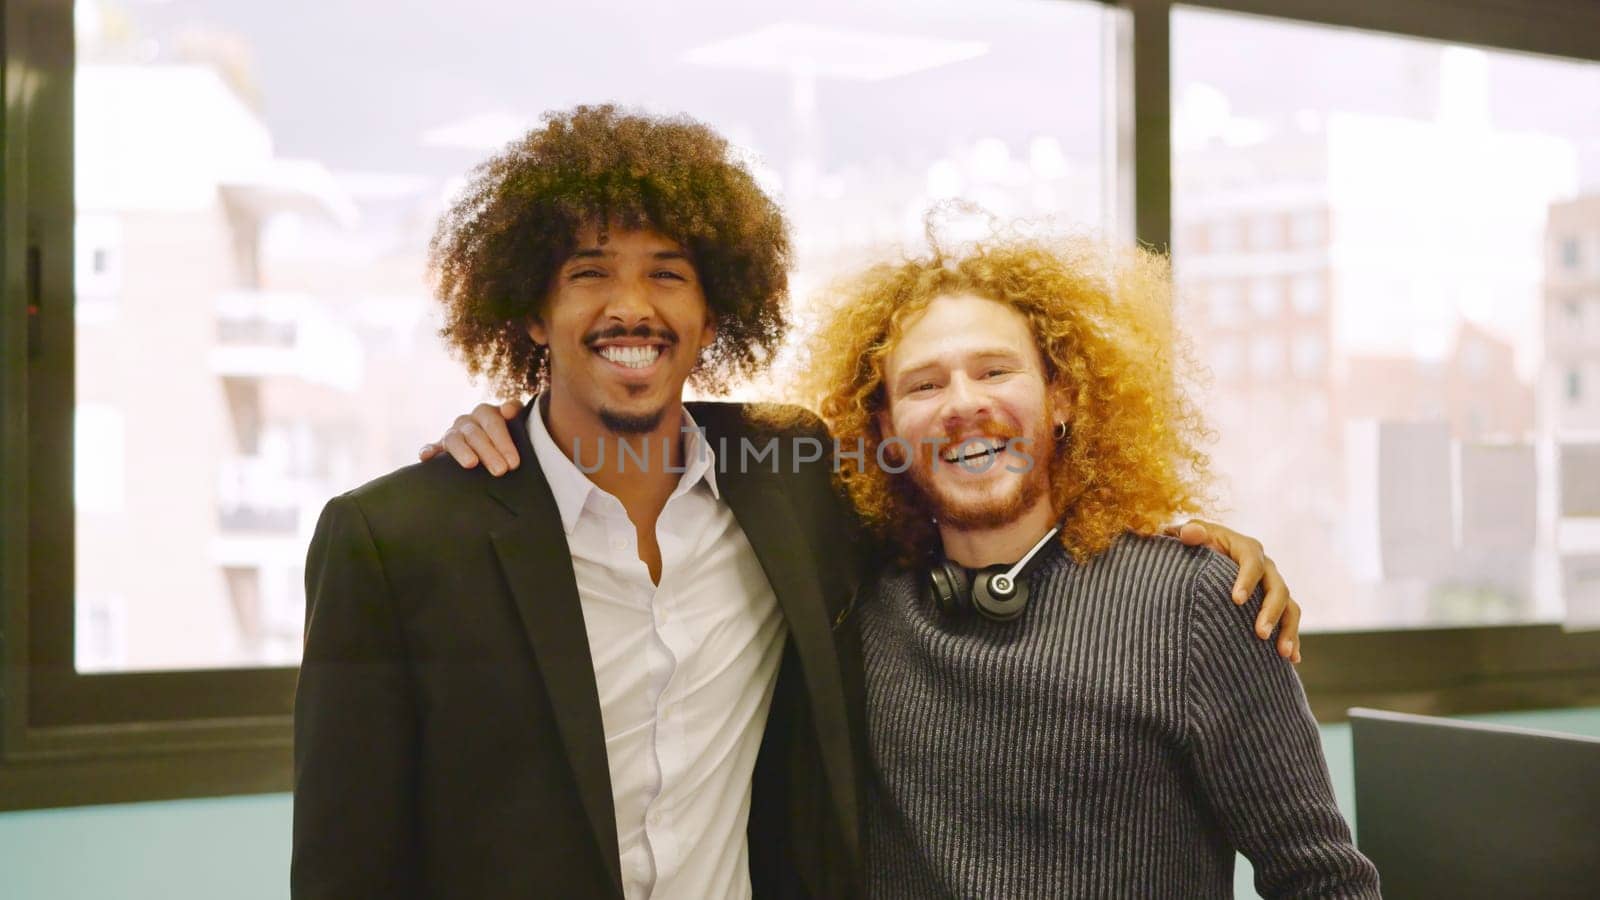 Two coworkers with curly hair embracing and smiling at camera in the office